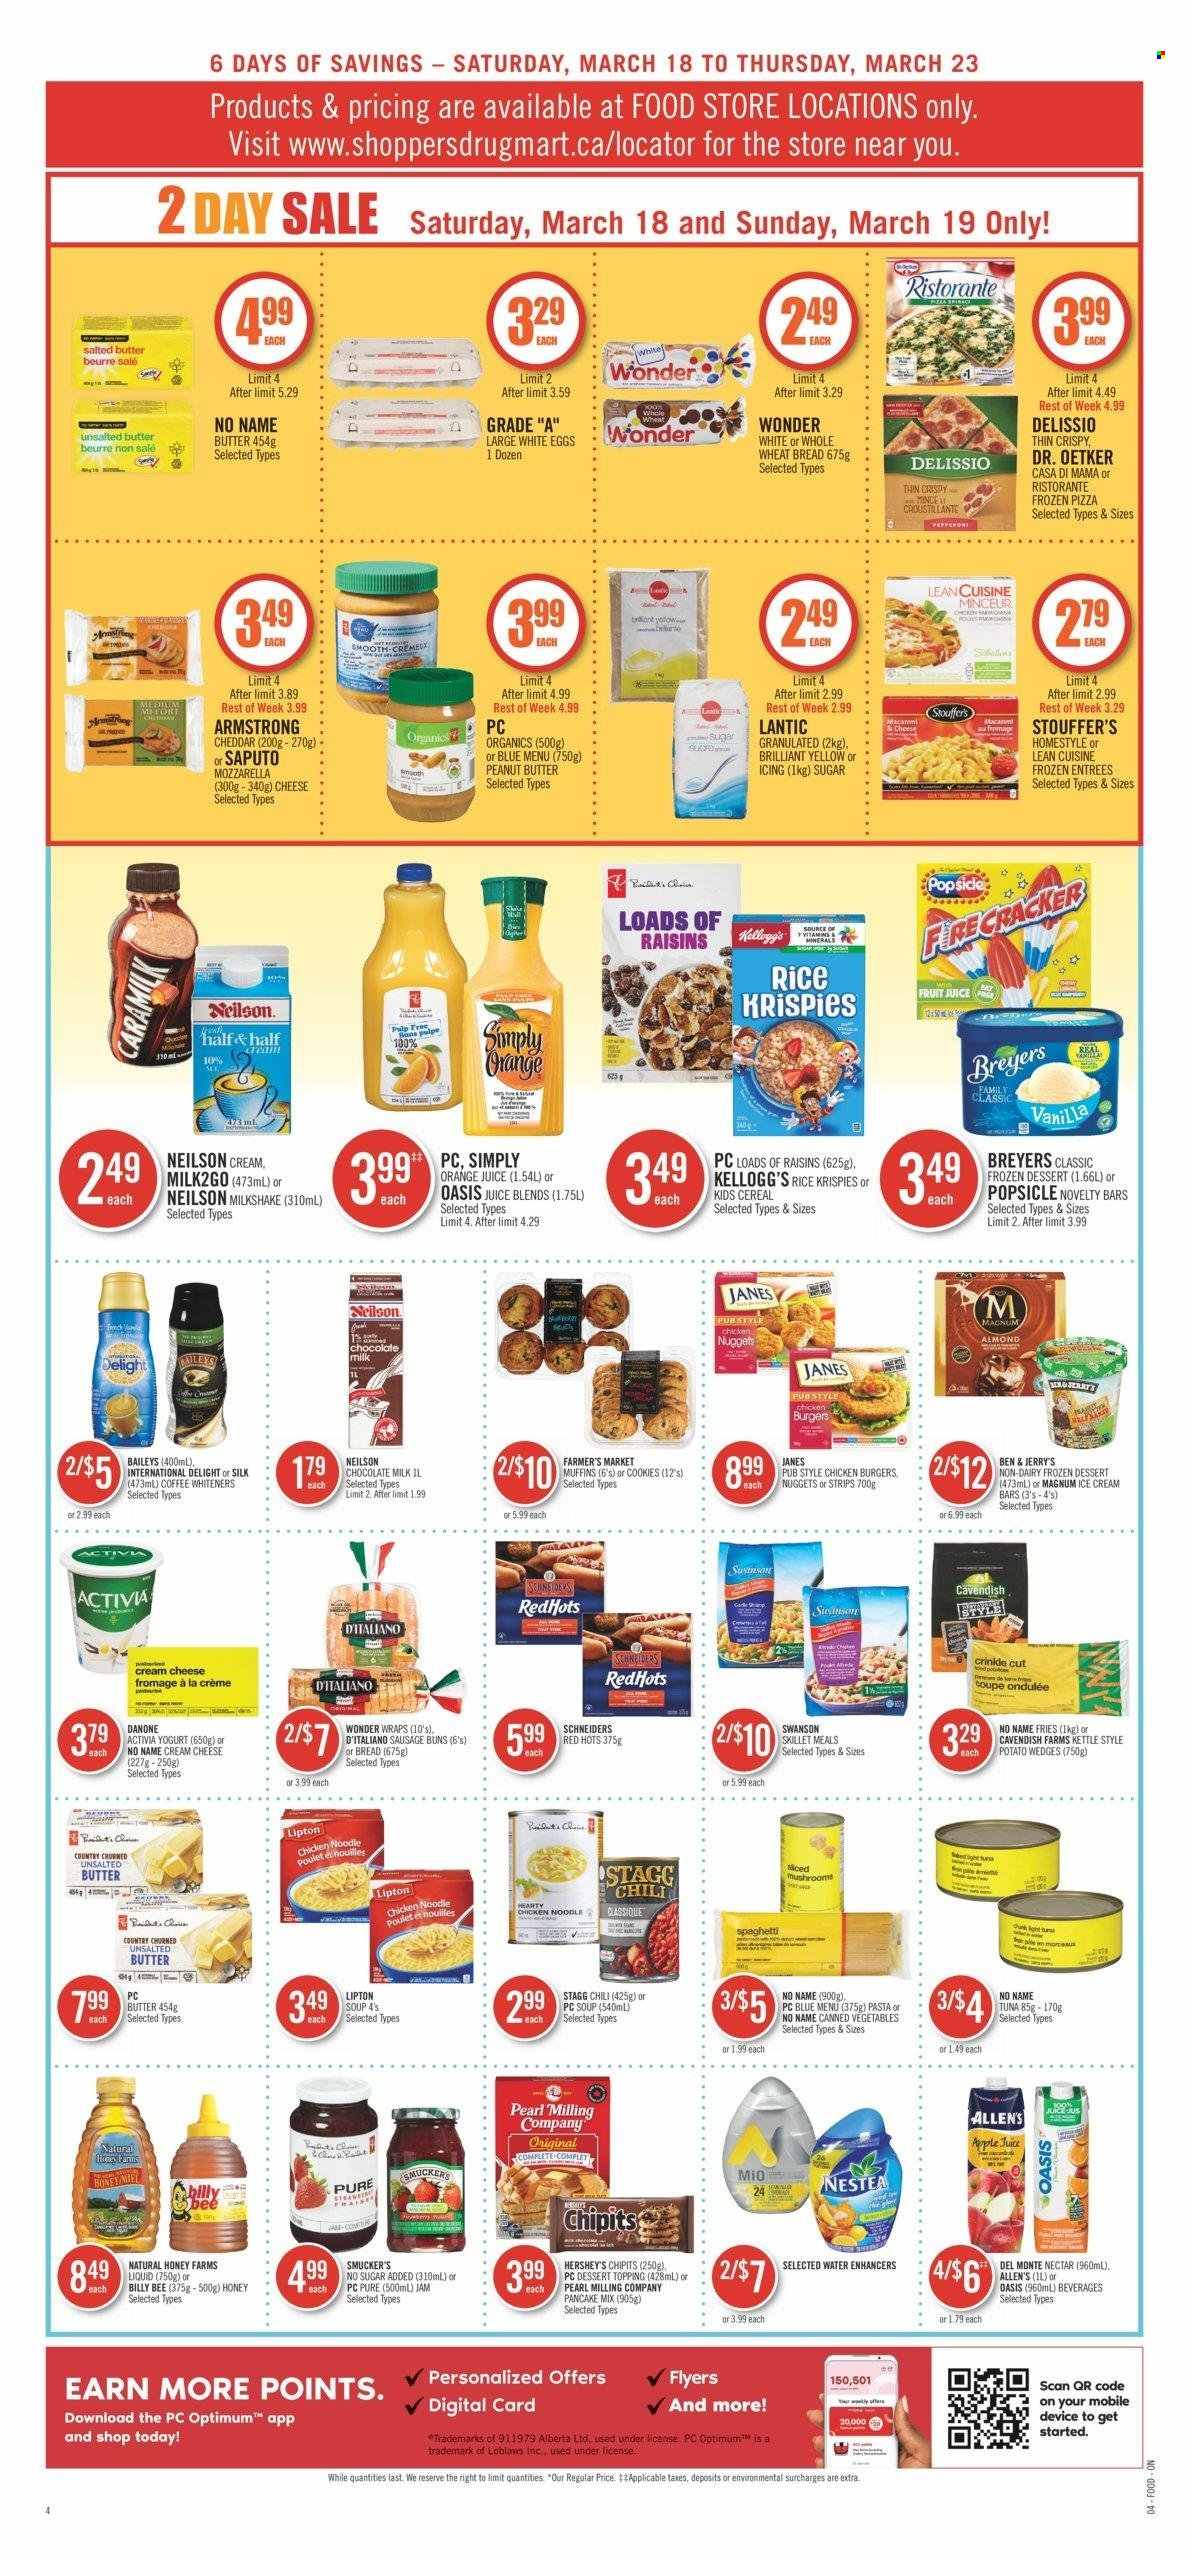 thumbnail - Shoppers Drug Mart Flyer - March 18, 2023 - March 23, 2023 - Sales products - wheat bread, buns, wraps, tuna, No Name, spaghetti, pizza, soup, nuggets, hamburger, pancakes, chicken nuggets, noodles, Lean Cuisine, cream cheese, cheddar, Dr. Oetker, yoghurt, Activia, milkshake, Silk, eggs, salted butter, coffee whitener, Magnum, ice cream, ice cream bars, Hershey's, Ben & Jerry's, Stouffer's, cookies, milk chocolate, muffin, Kellogg's, topping, canned vegetables, mushrooms, Del Monte, cereals, Rice Krispies, honey, fruit jam, peanut butter, Baileys, dried fruit, apple juice, orange juice, juice, fruit juice, water, coffee, Optimum, Half and half, raisins, Danone, Lipton. Page 3.